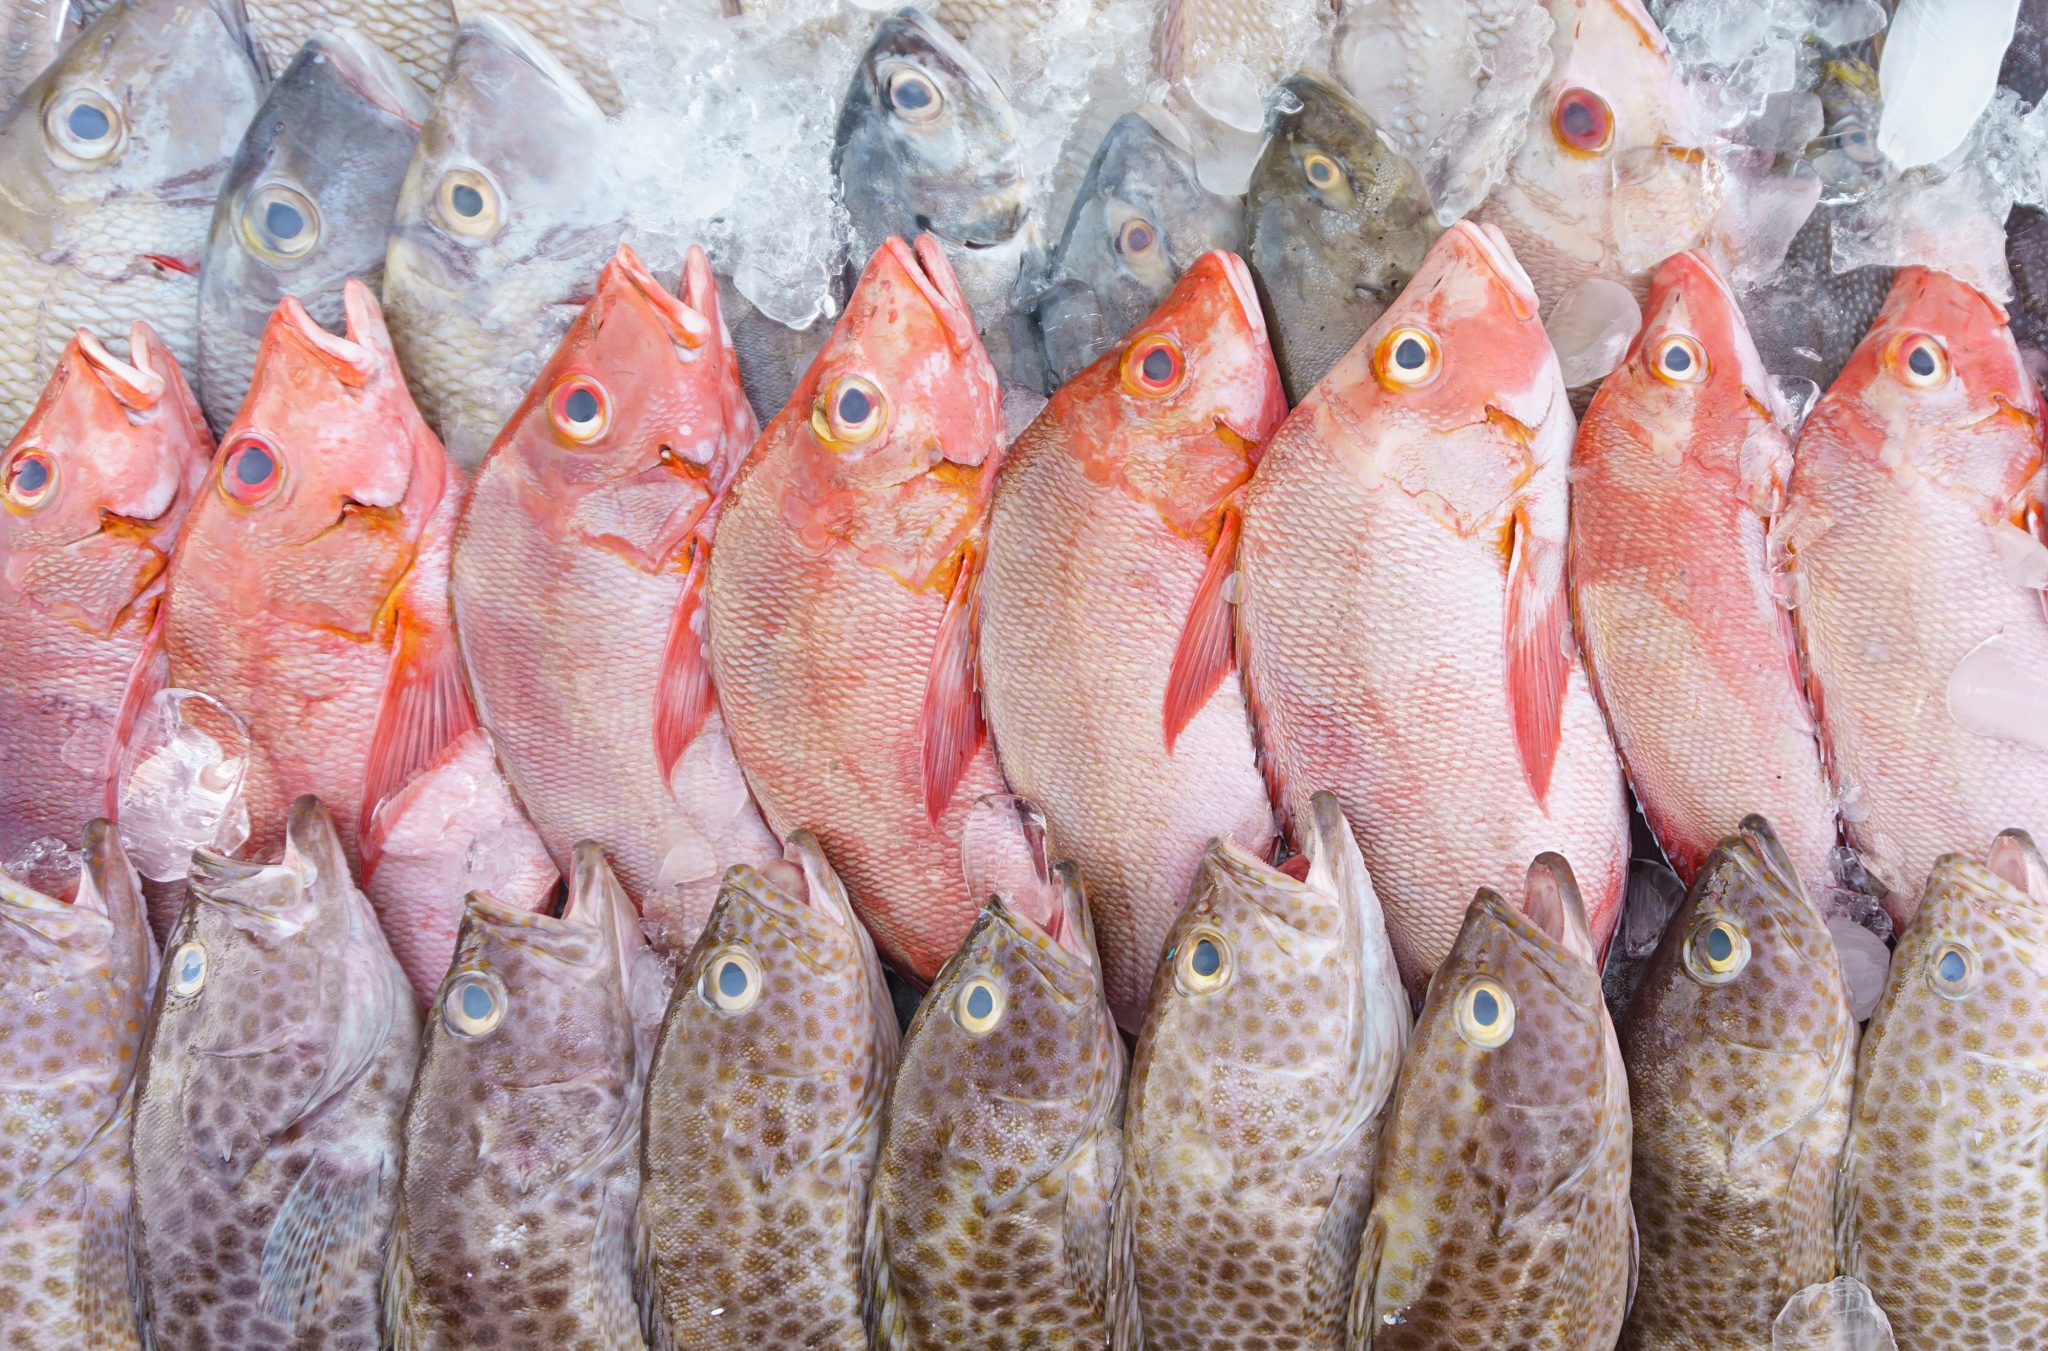 Seaspiracy inspires grocery store to phase out sale of fish products